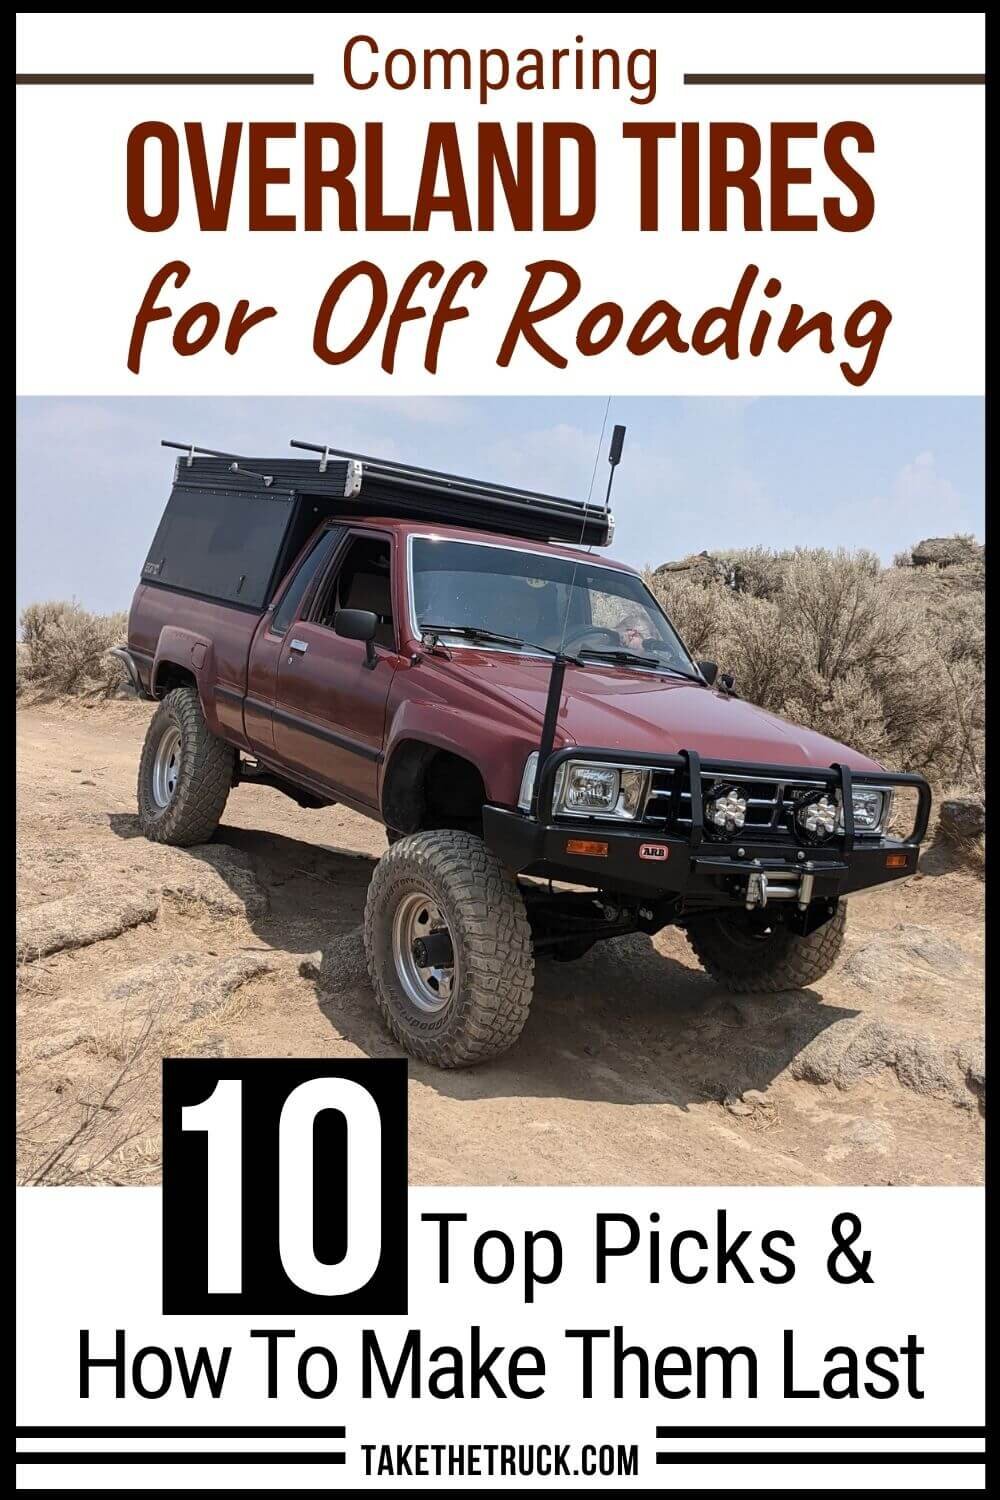 Find overland tires or off road tires for your overlanding vehicle. Know how to choose between all terrain truck tires, hybrid tires, or mud terrain tires - and 10 specific overlanding tires!